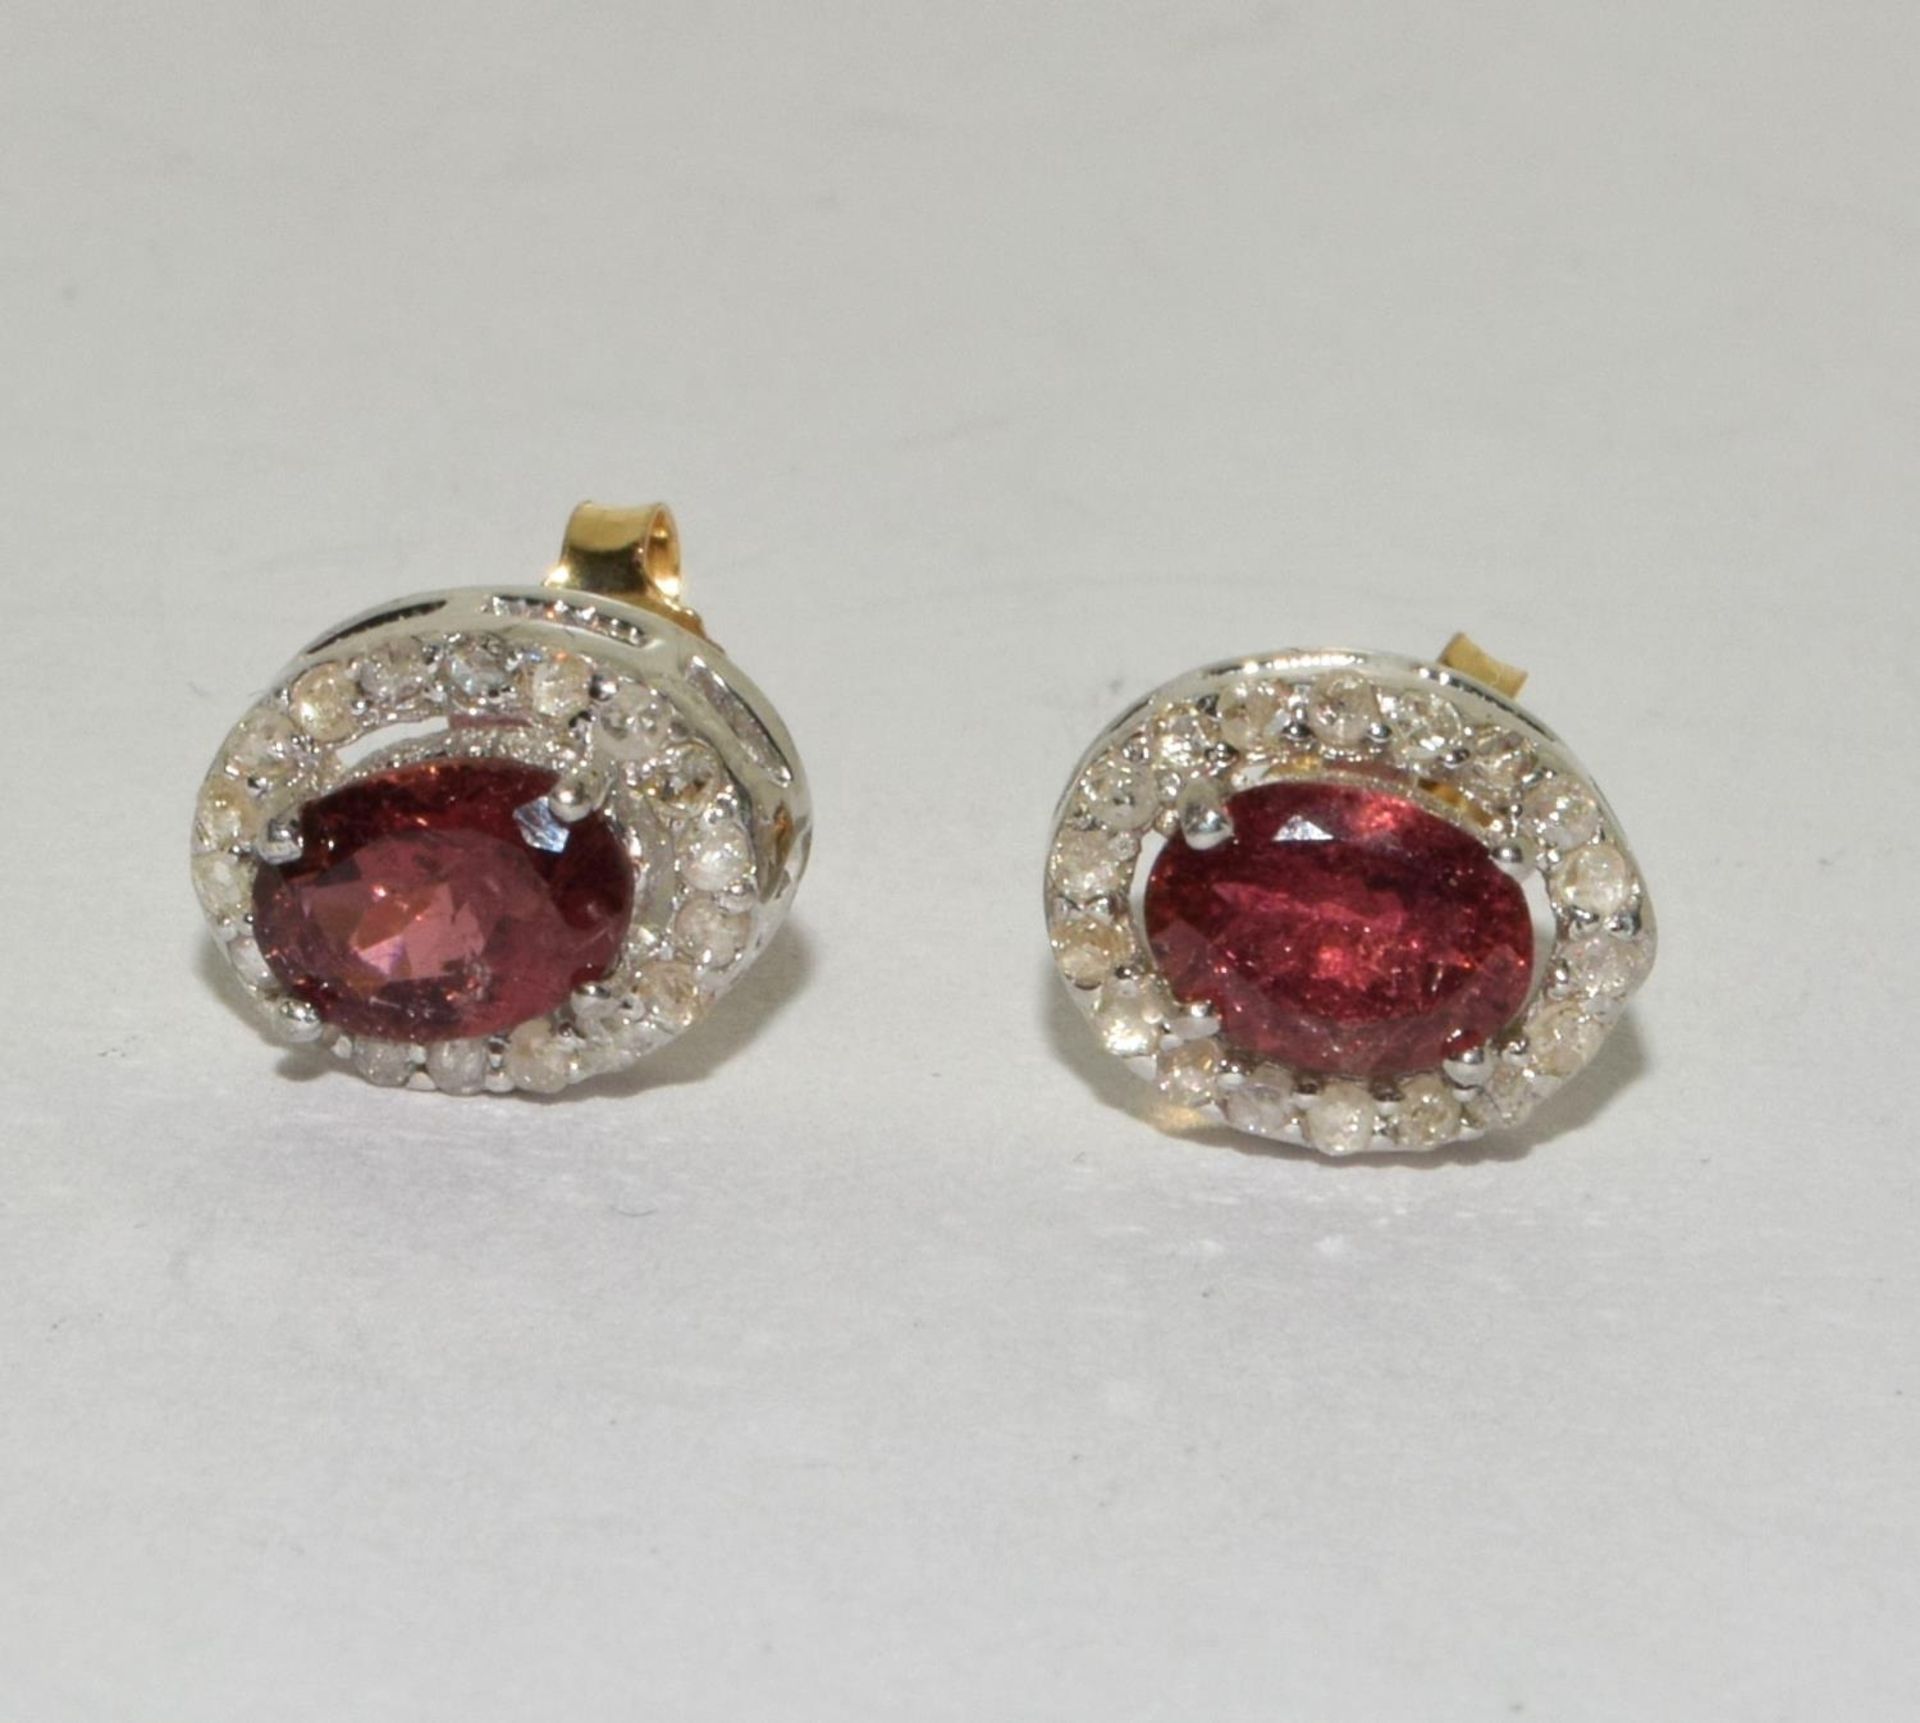 Diamond and pink tourmaline stud earrings with 18ct gold posts - Image 3 of 6